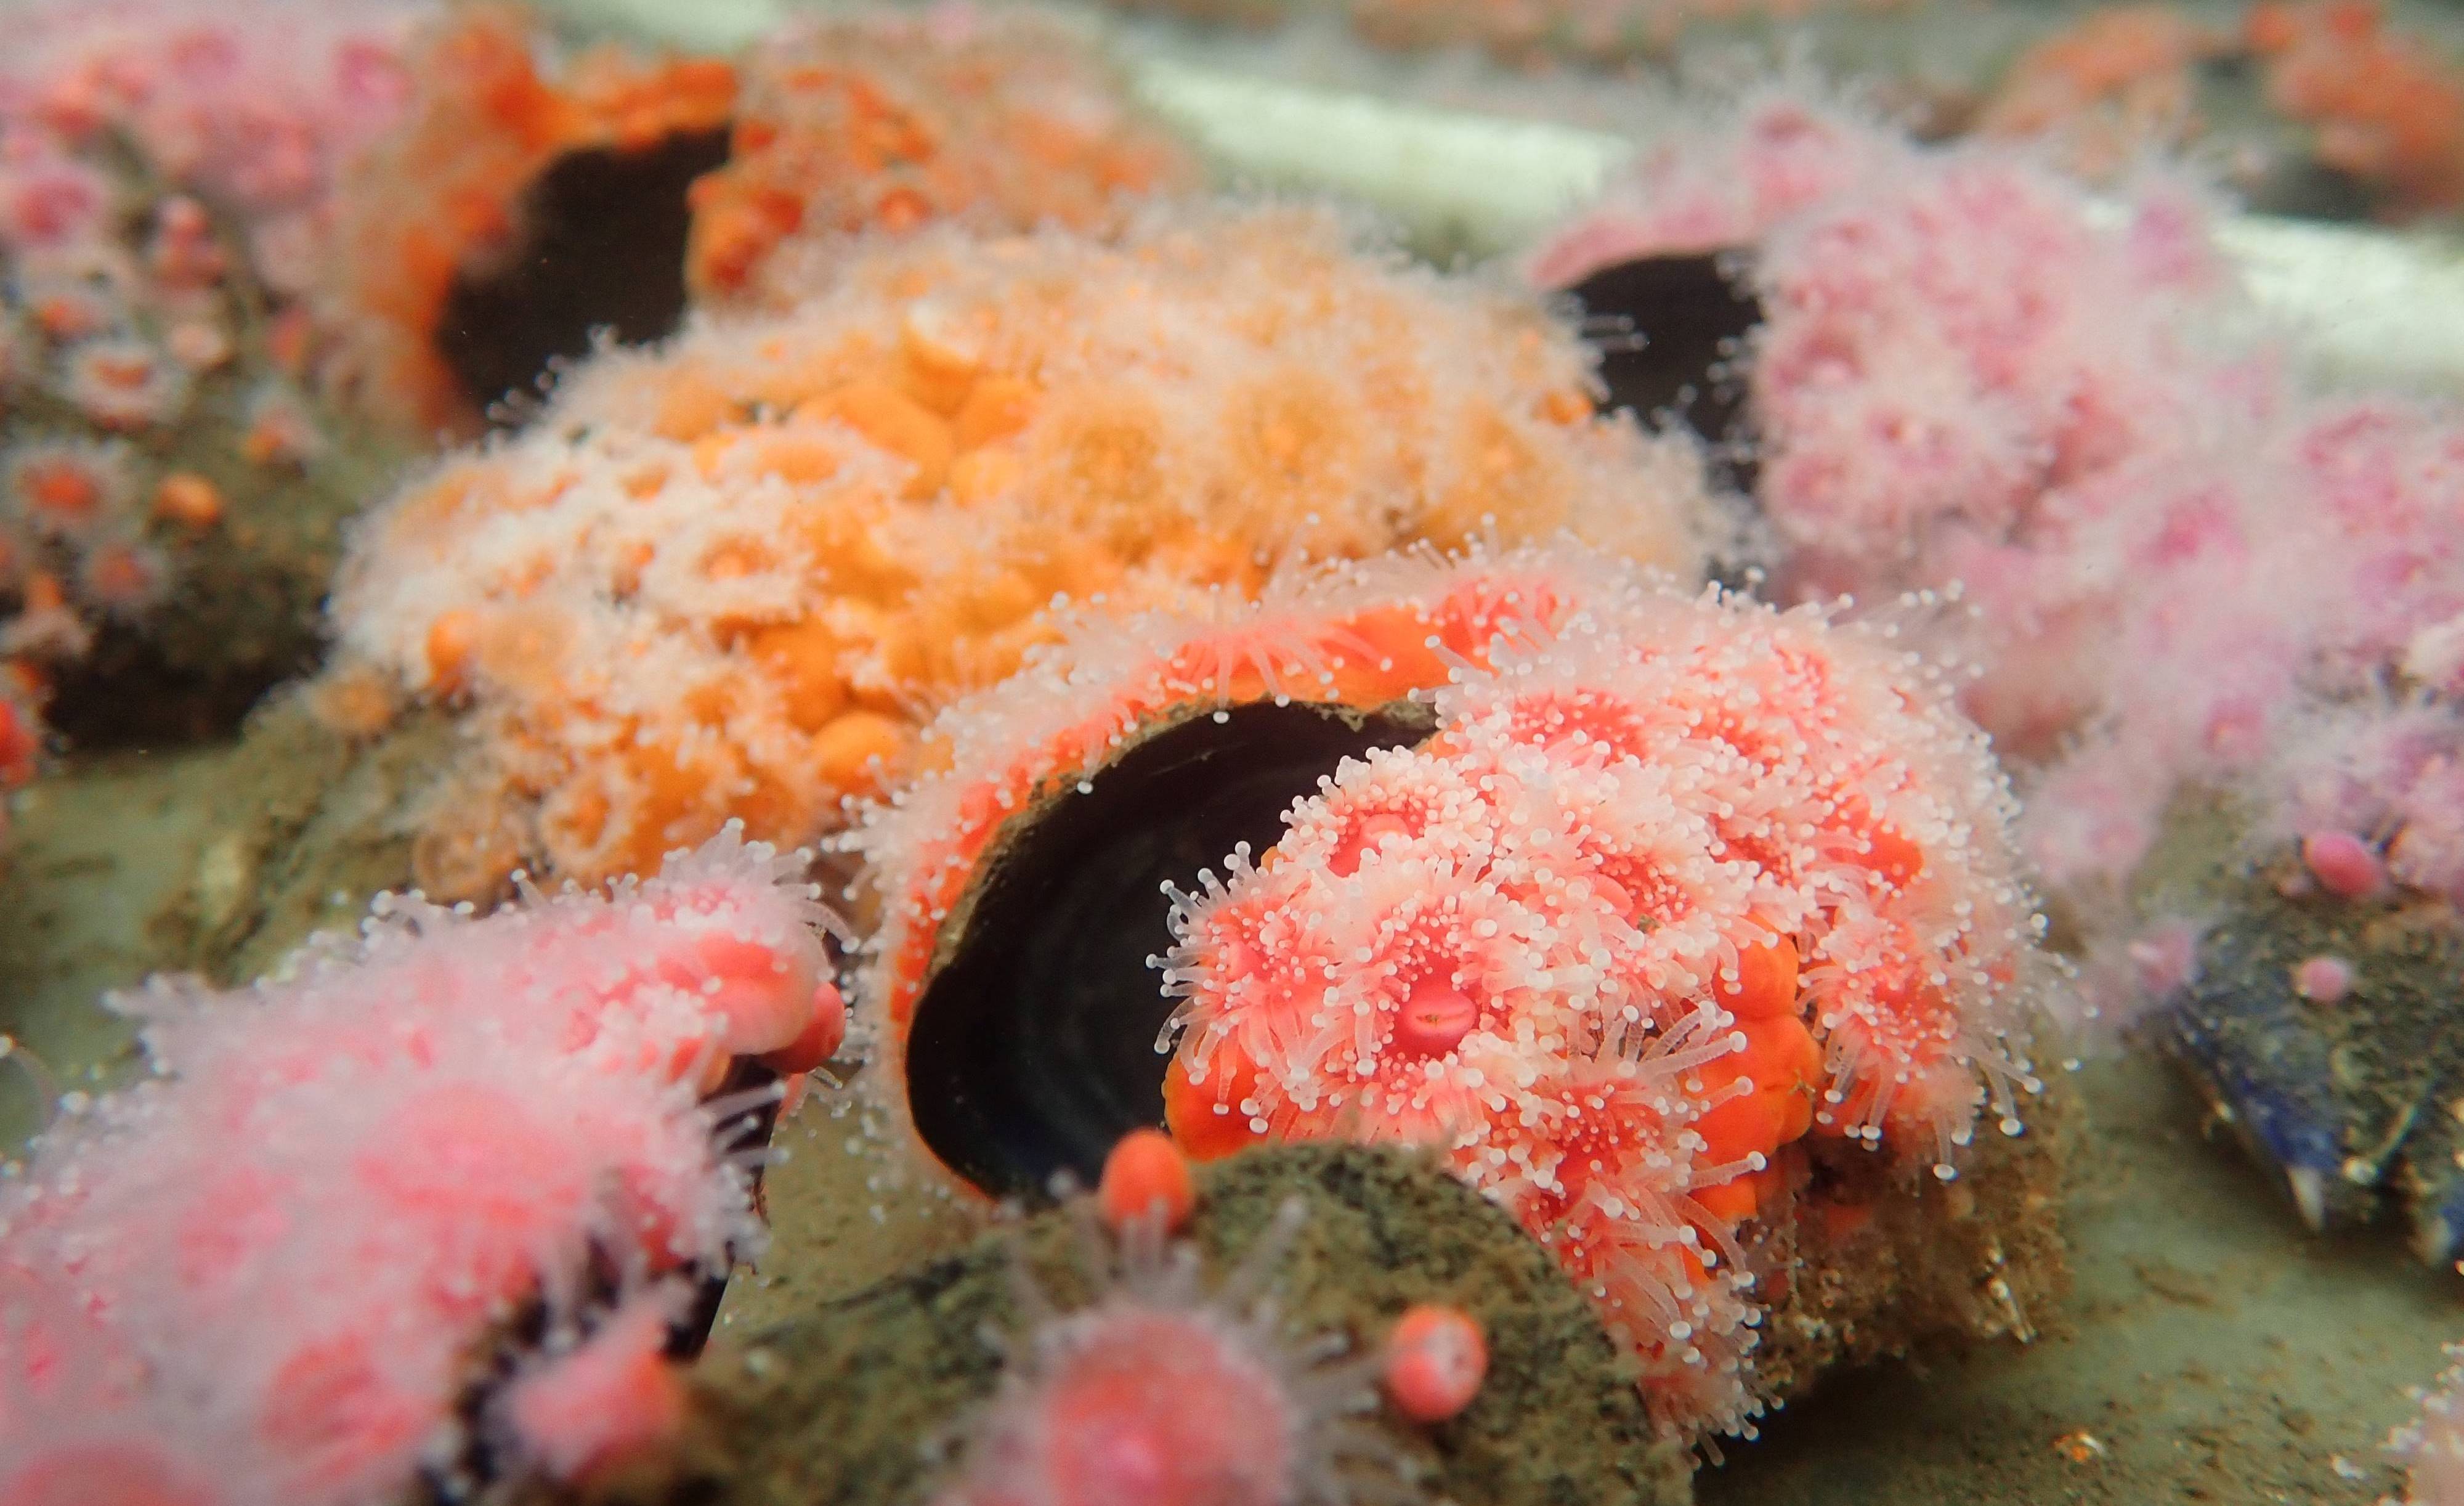 Bright orange, red, and pink strawberry anemones in a tank